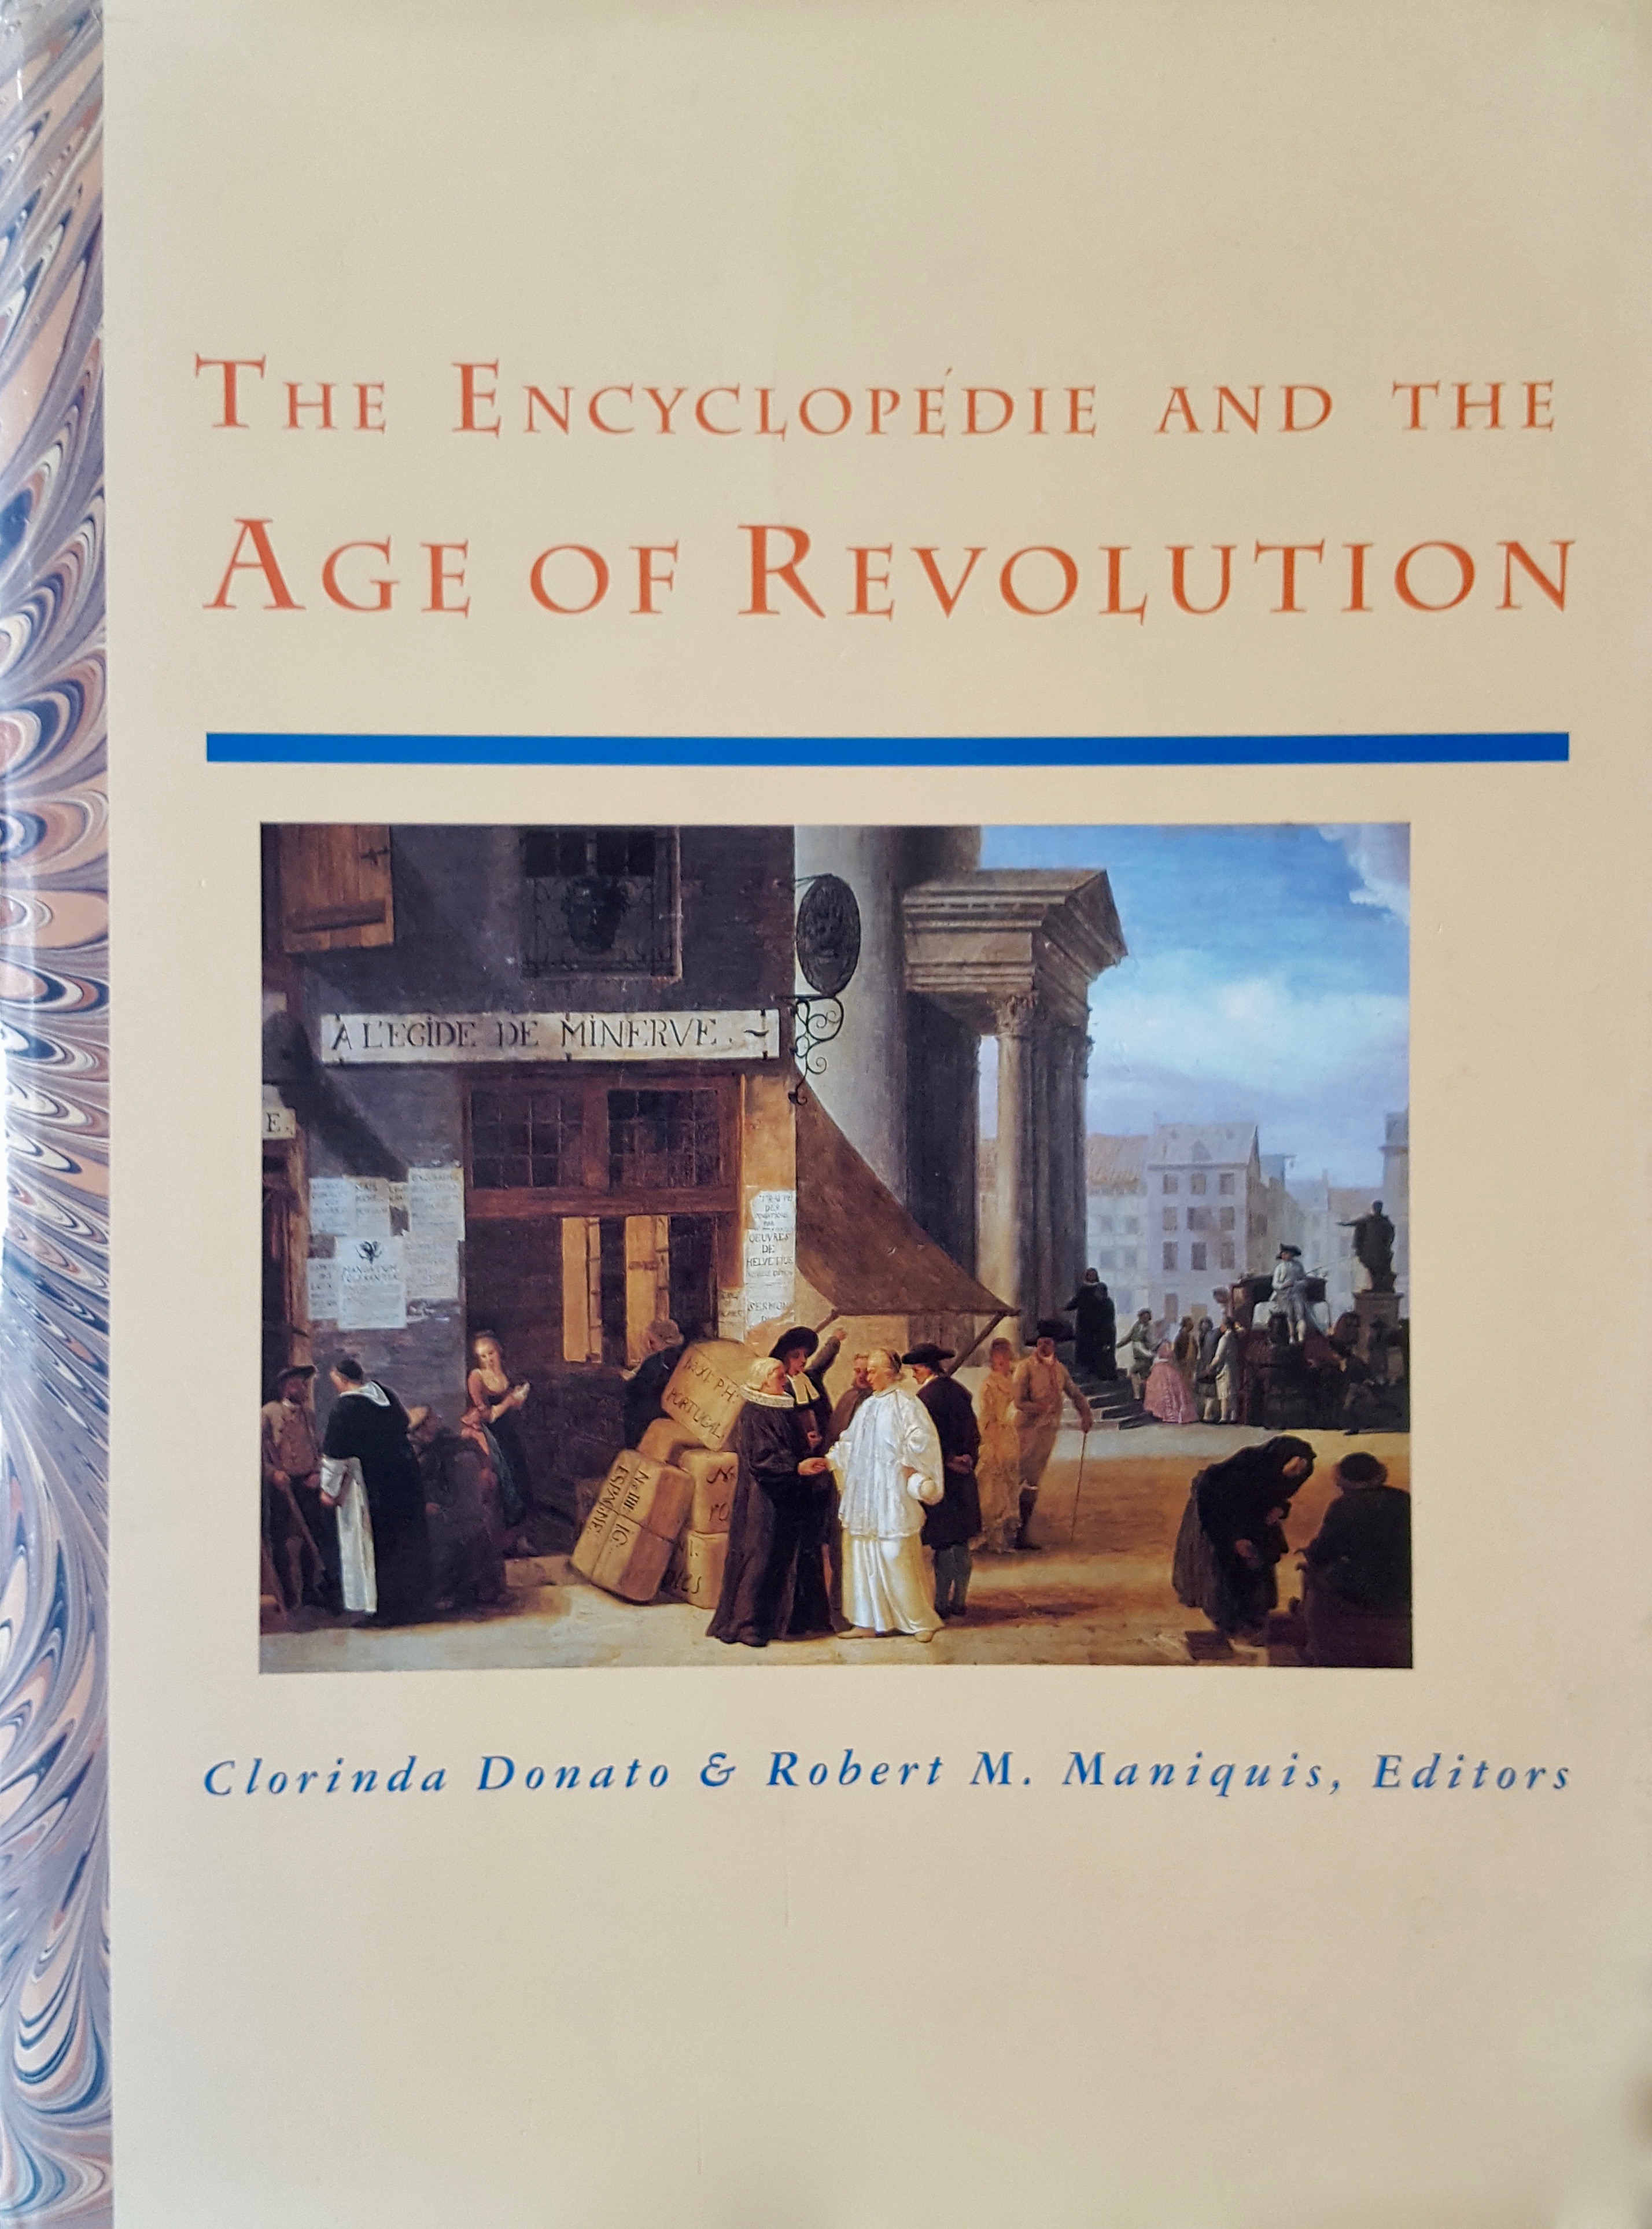 Book cover of the Encyclopedie and the Age of Revolution